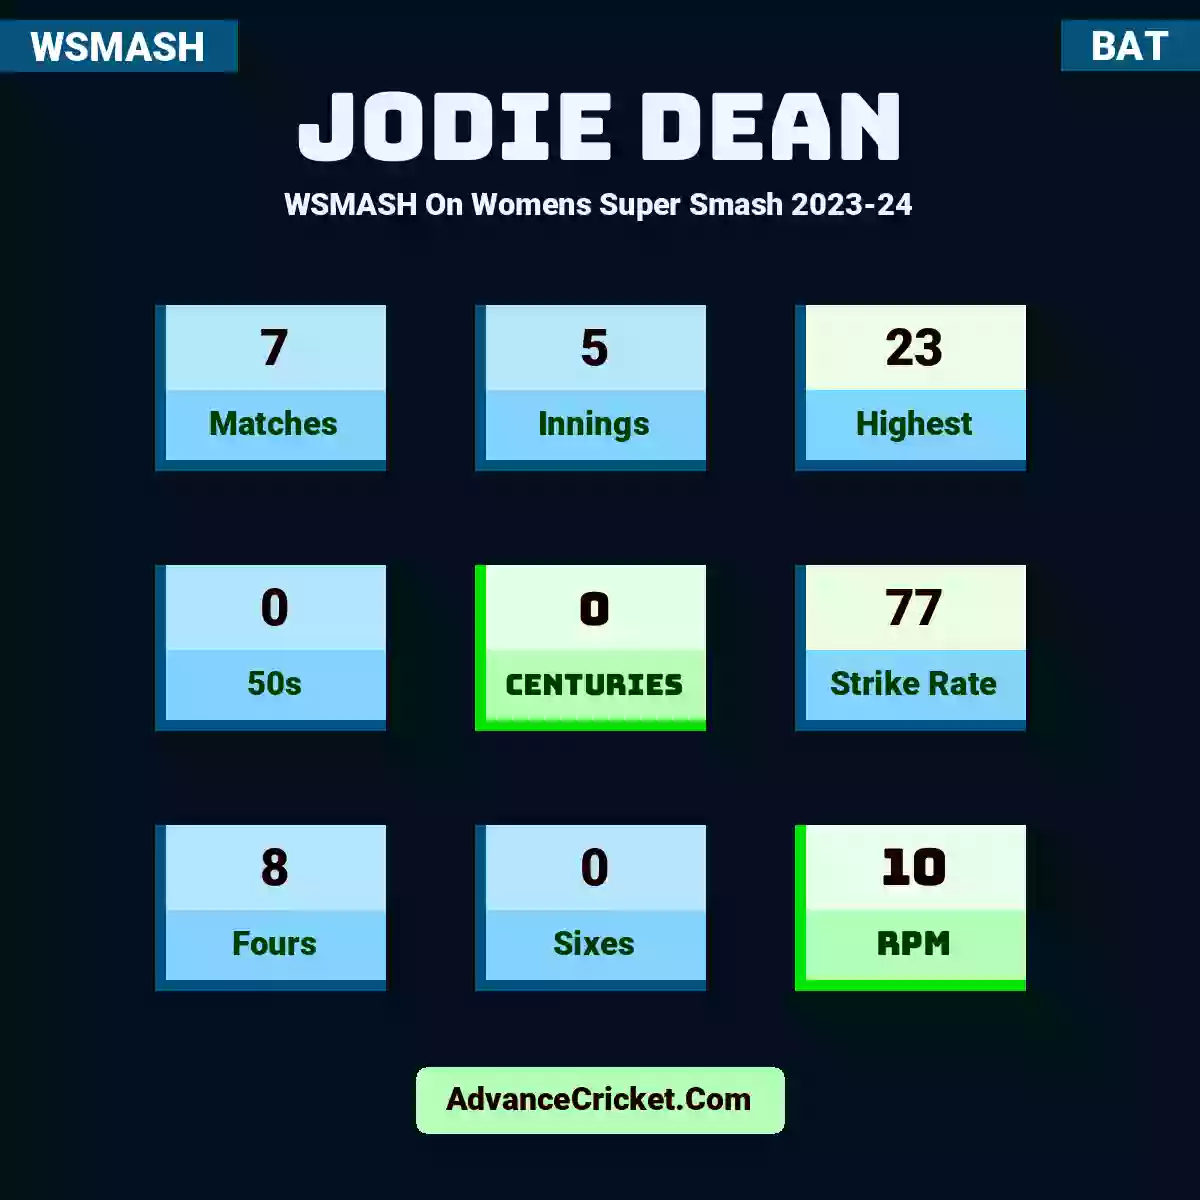 Jodie Dean WSMASH  On Womens Super Smash 2023-24, Jodie Dean played 7 matches, scored 23 runs as highest, 0 half-centuries, and 0 centuries, with a strike rate of 77. J.Dean hit 8 fours and 0 sixes, with an RPM of 10.